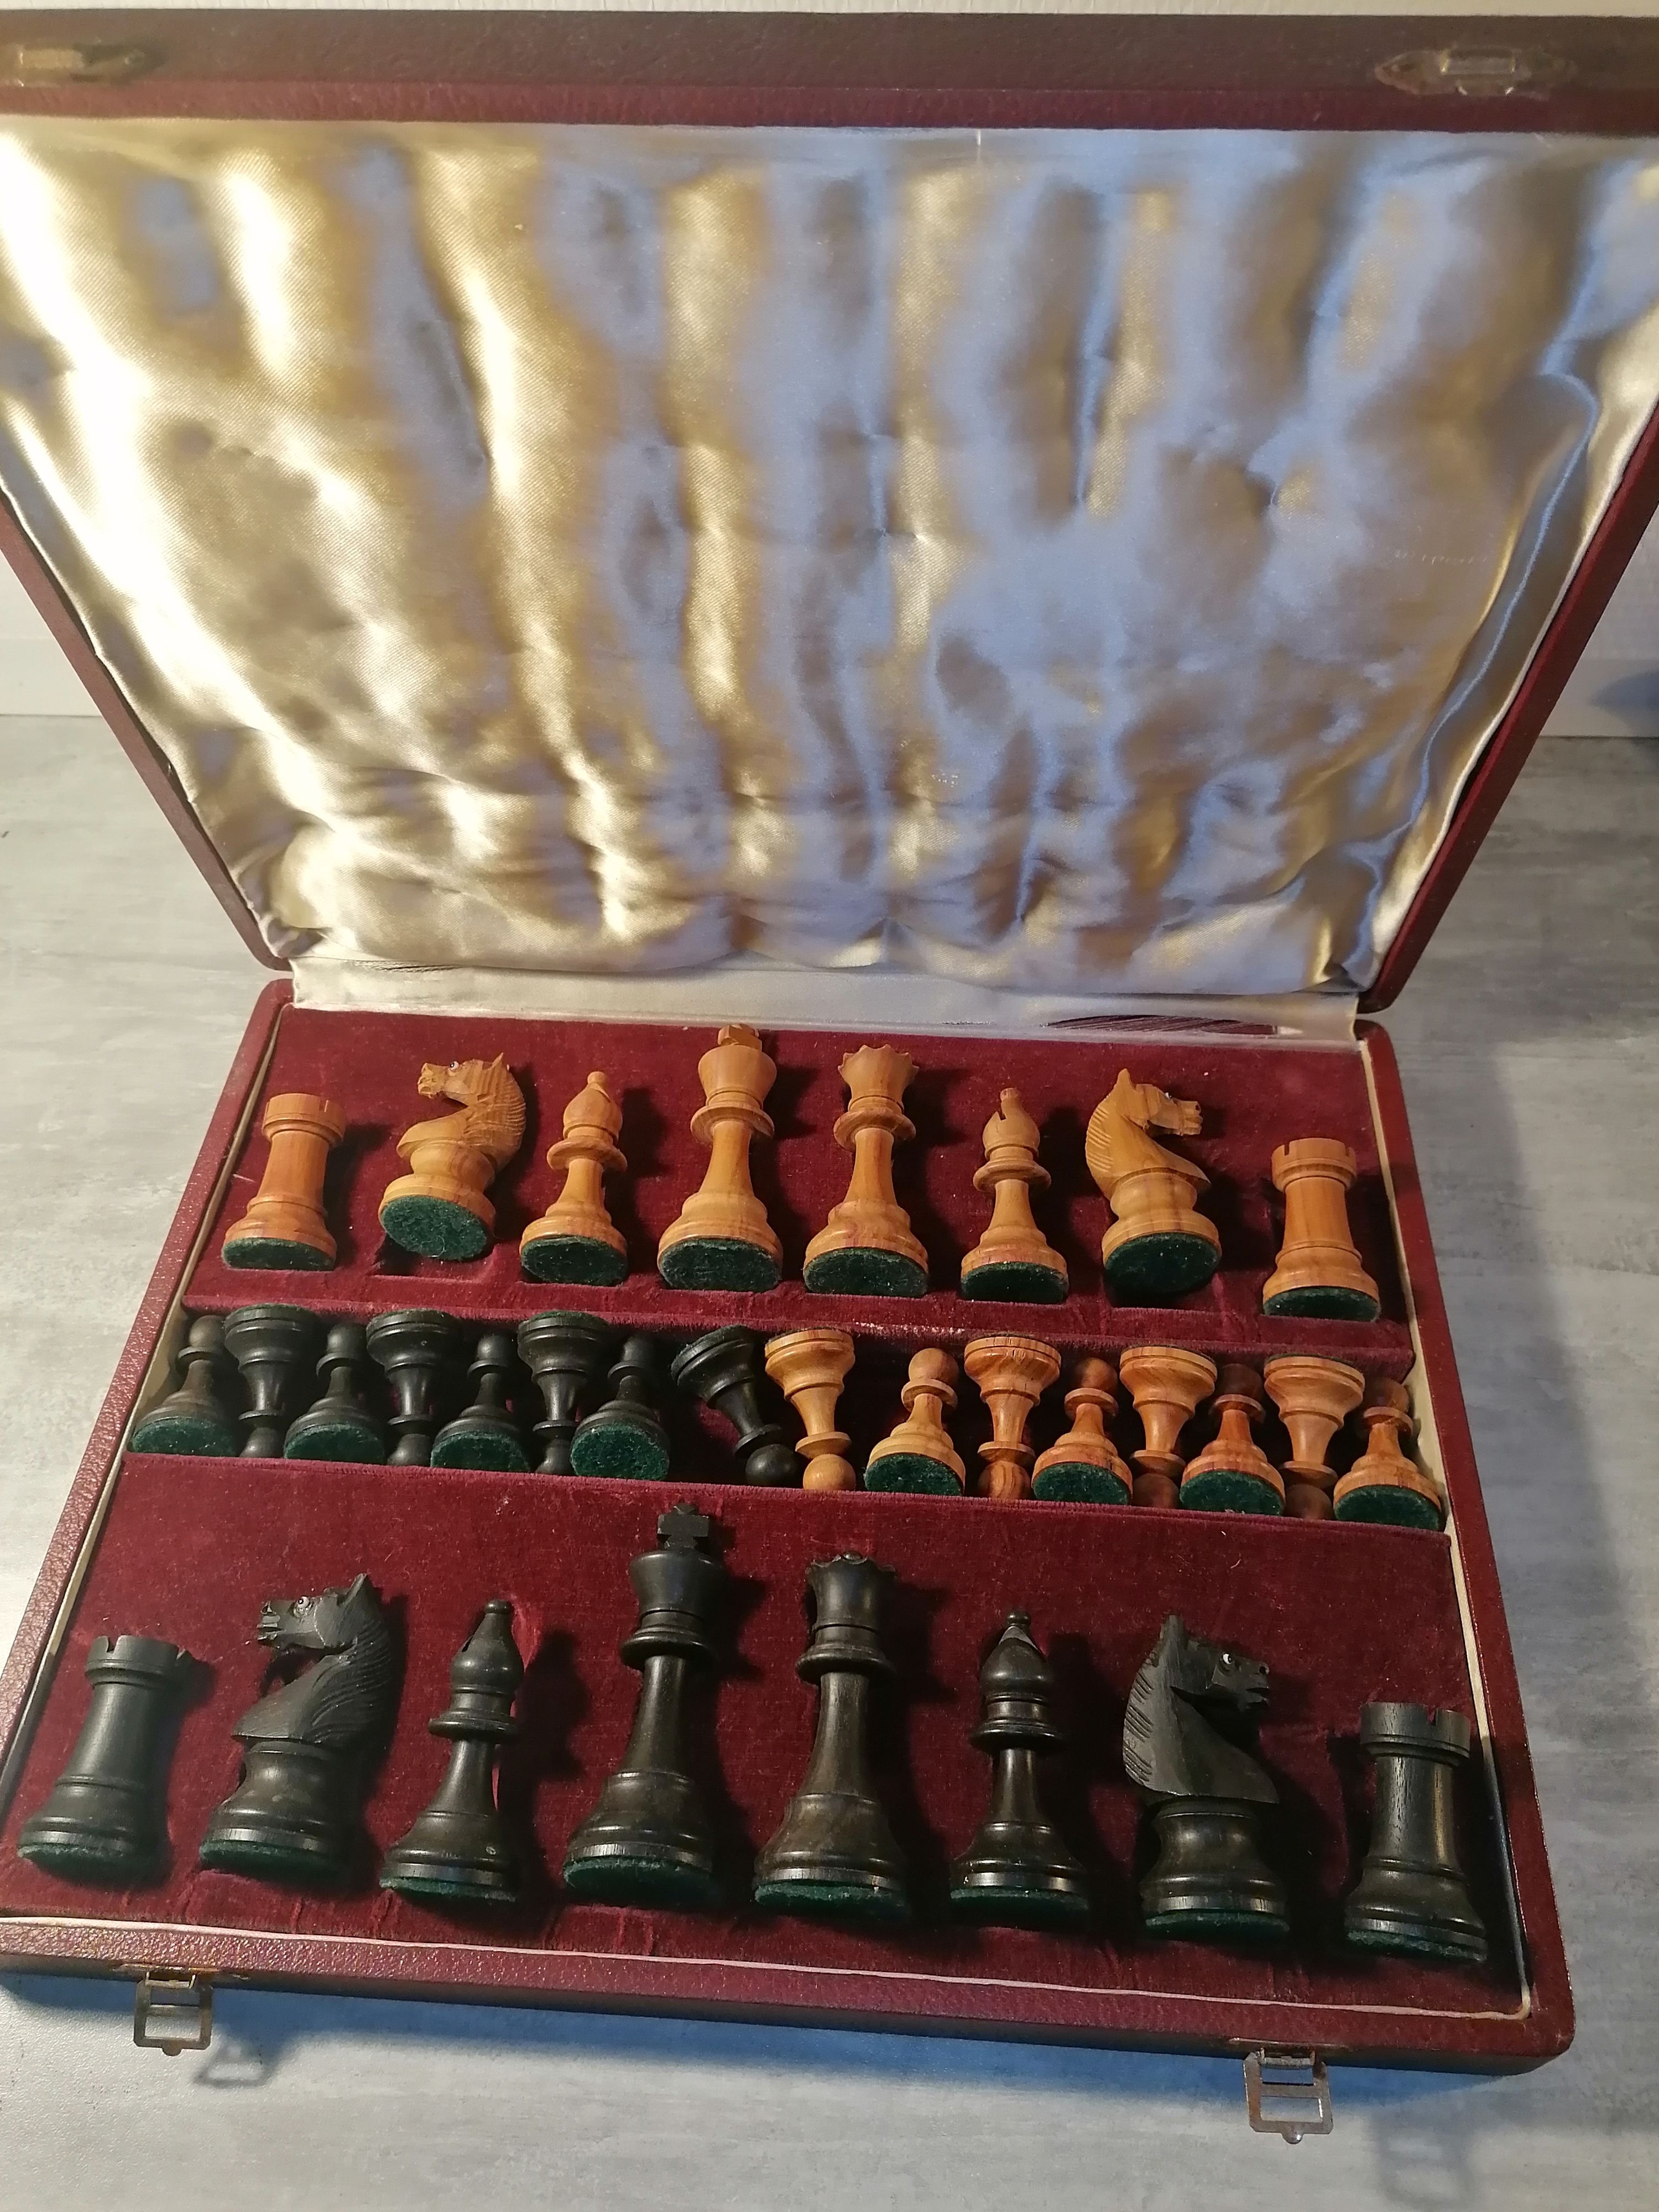 old chess set for sell - Chess Forums 